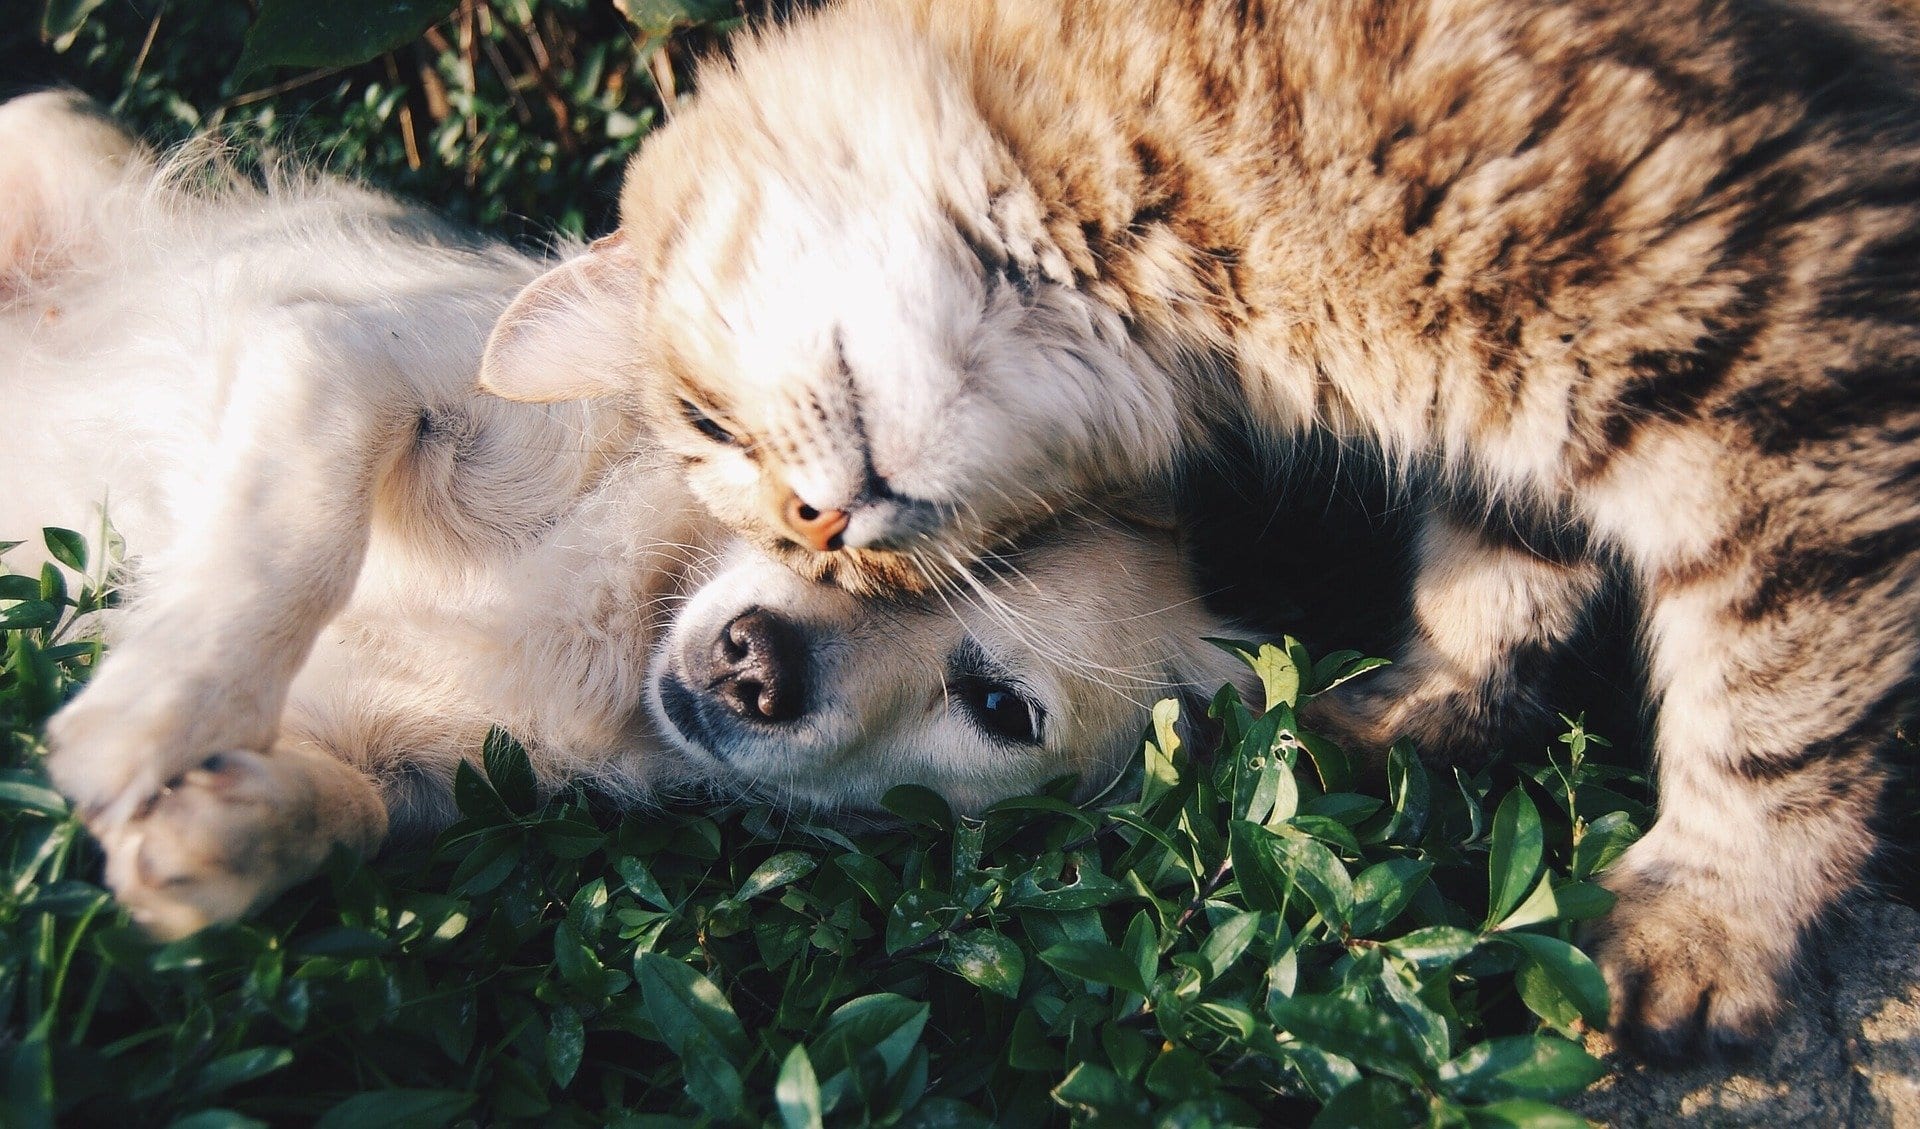 Orange cat rubbing its face against a white puppy dog laying in the grass